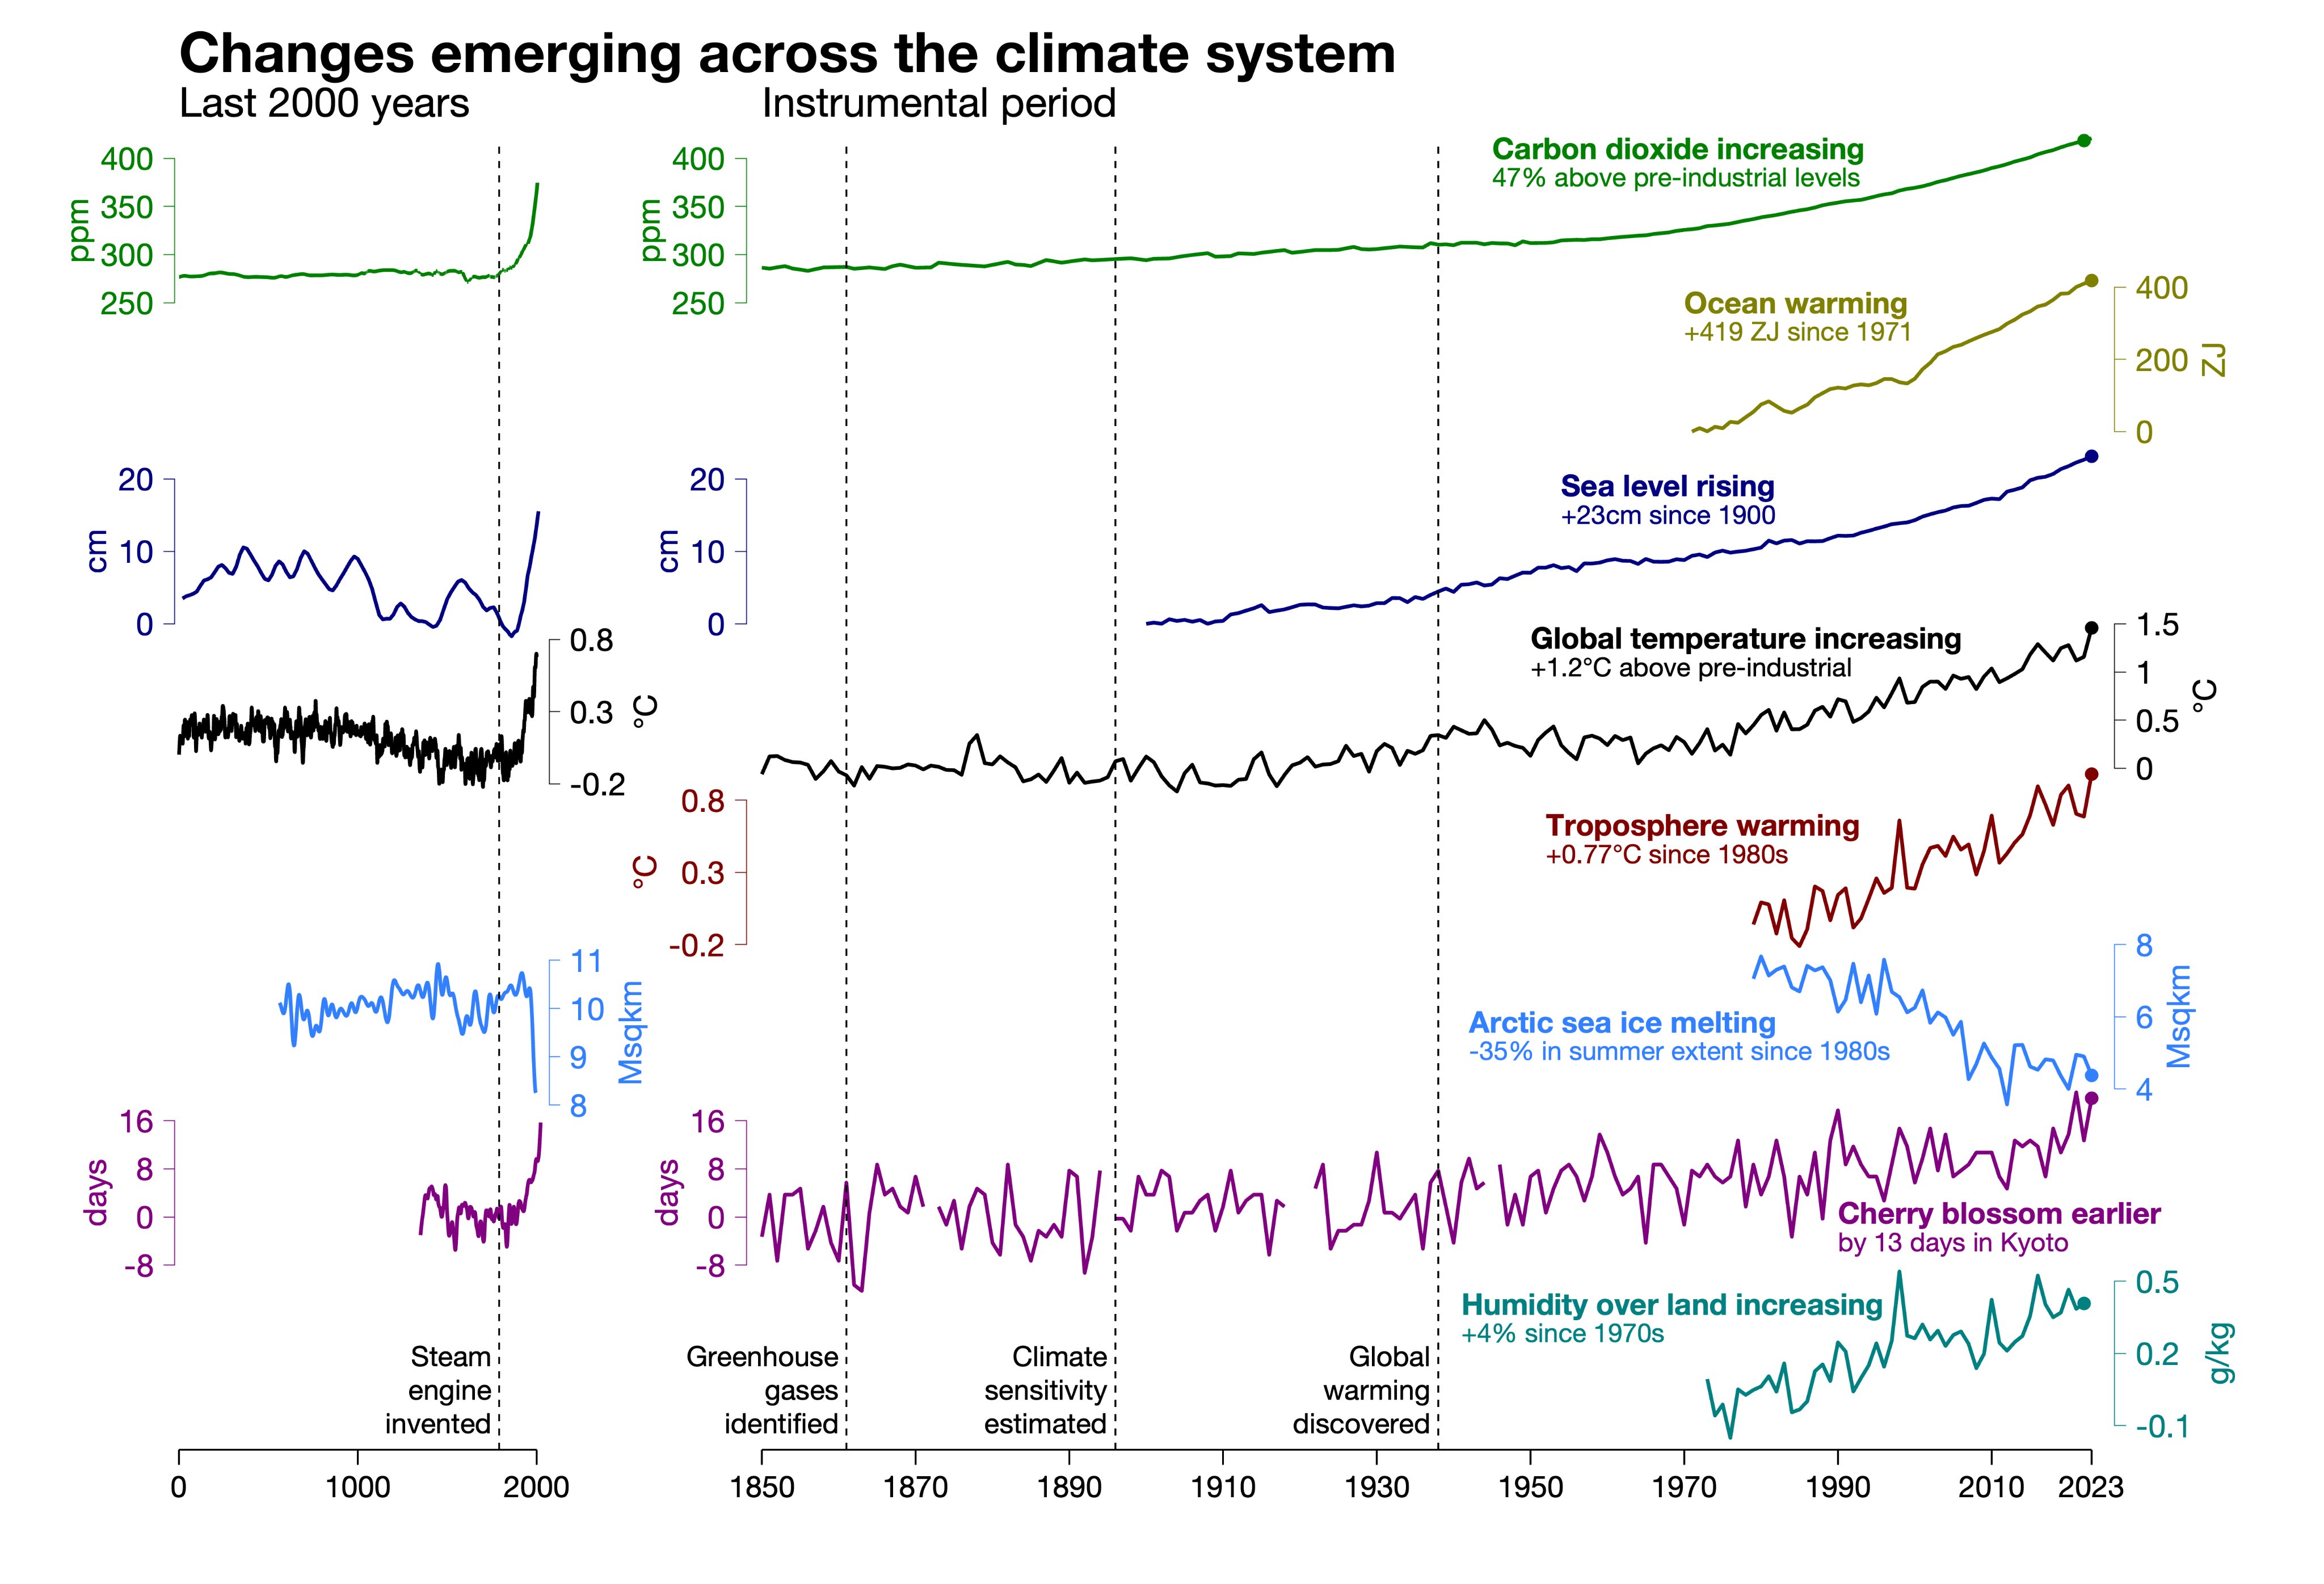 "In each case, recent changes are rapid & unusual compared to before human influence on the climate"